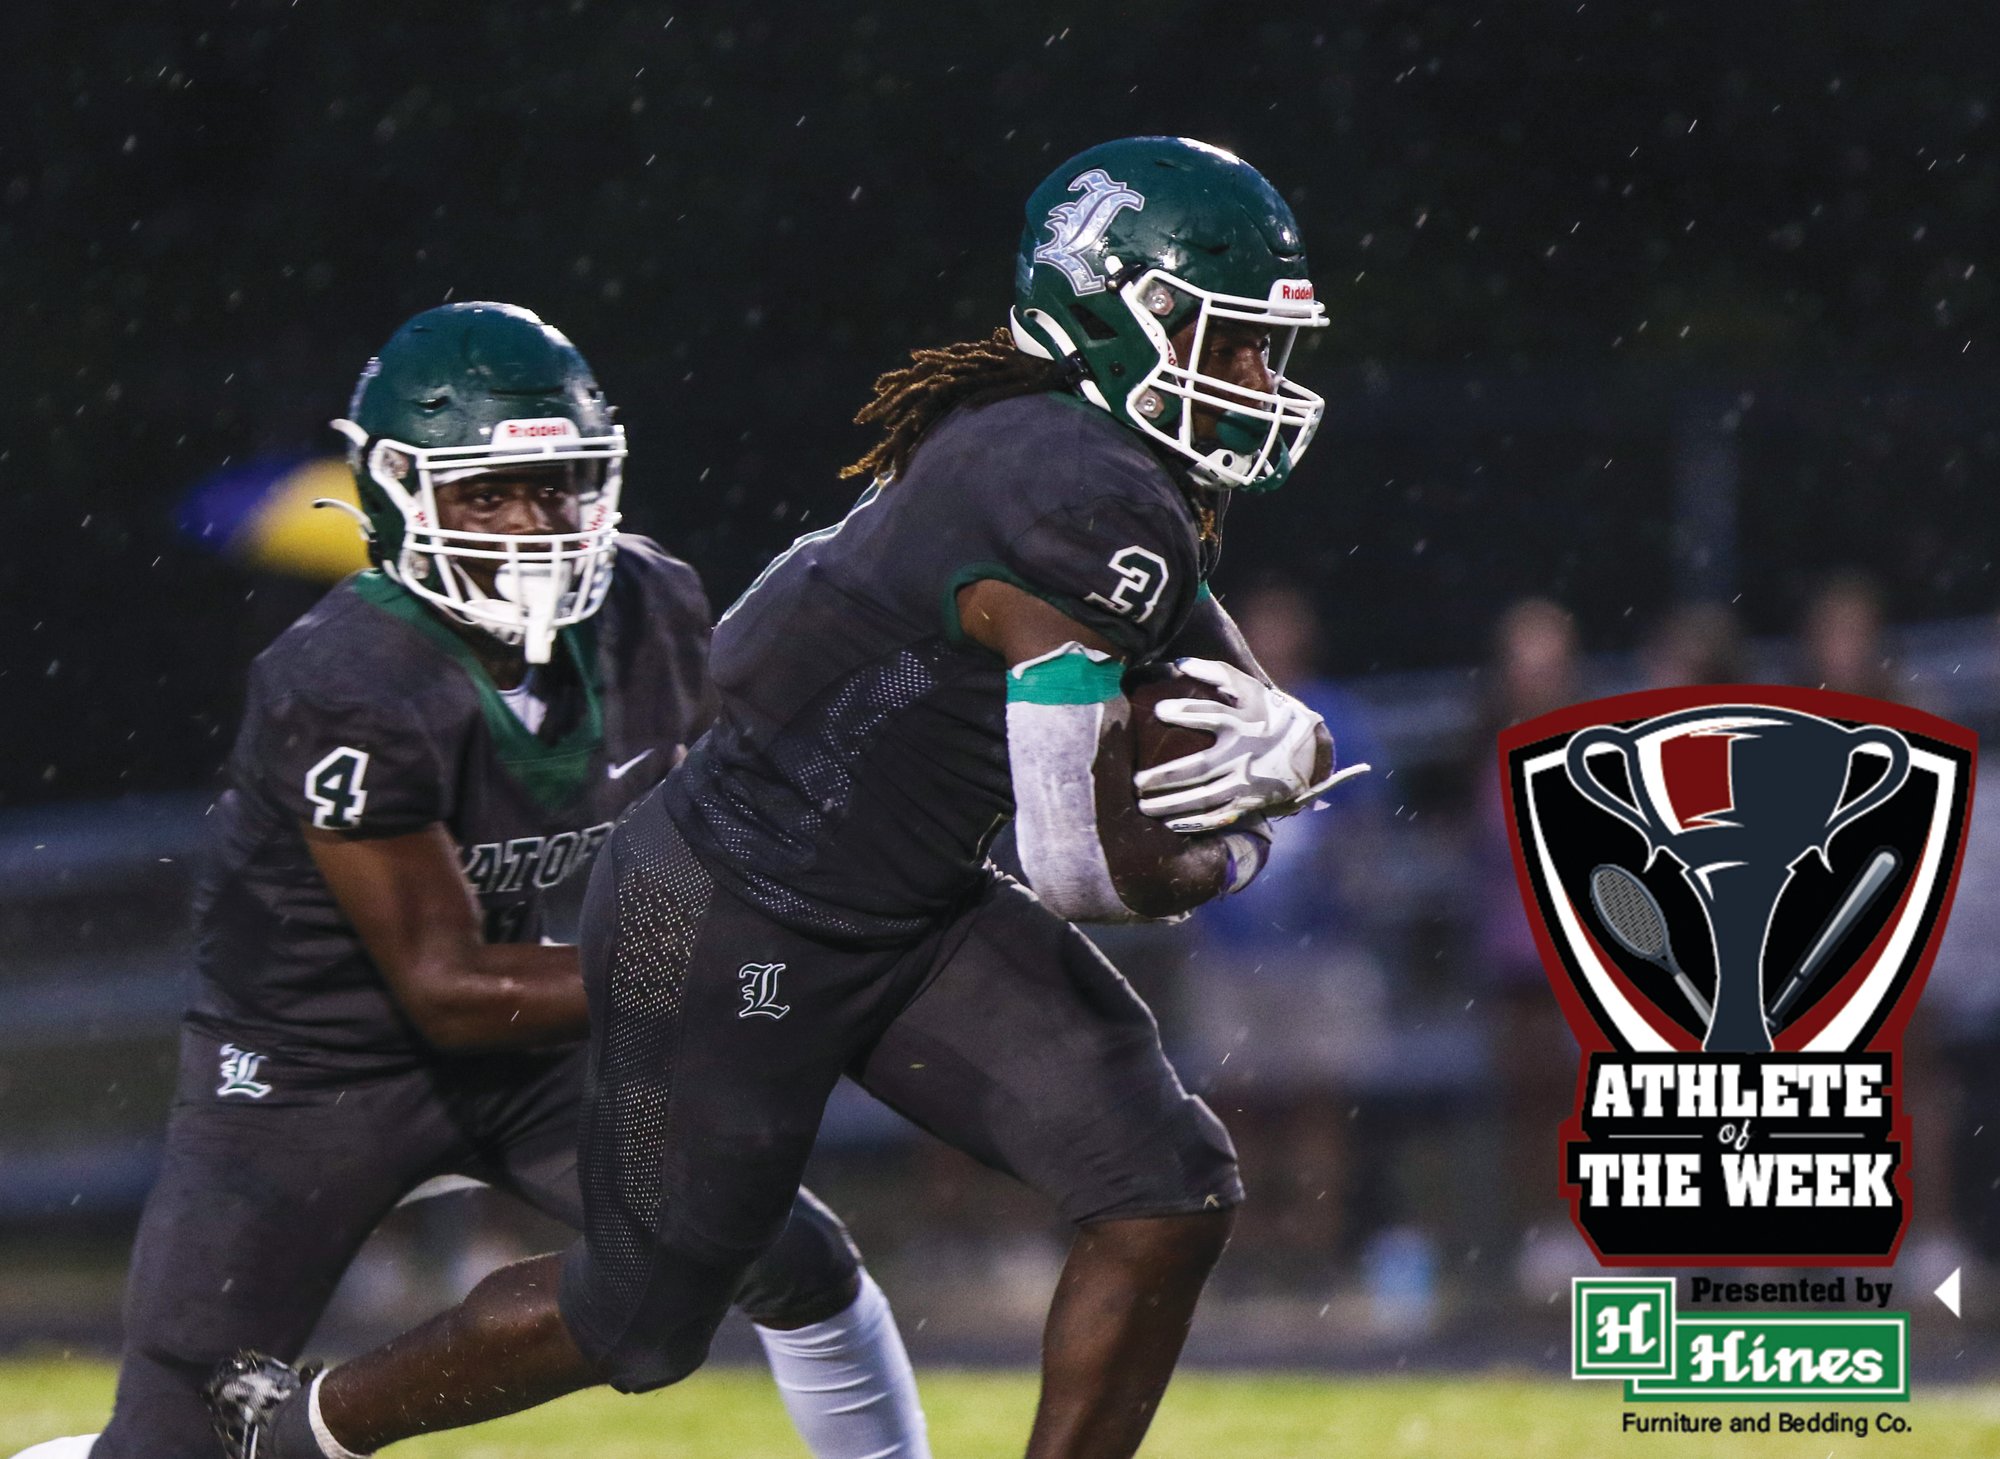 Lakewood running back Divon Woods ran for 160 yards and a touchdown in the Gators' 30-0 win over Fox Creek on Friday, earning Hines Furniture Athlete of the Week honors in the process.